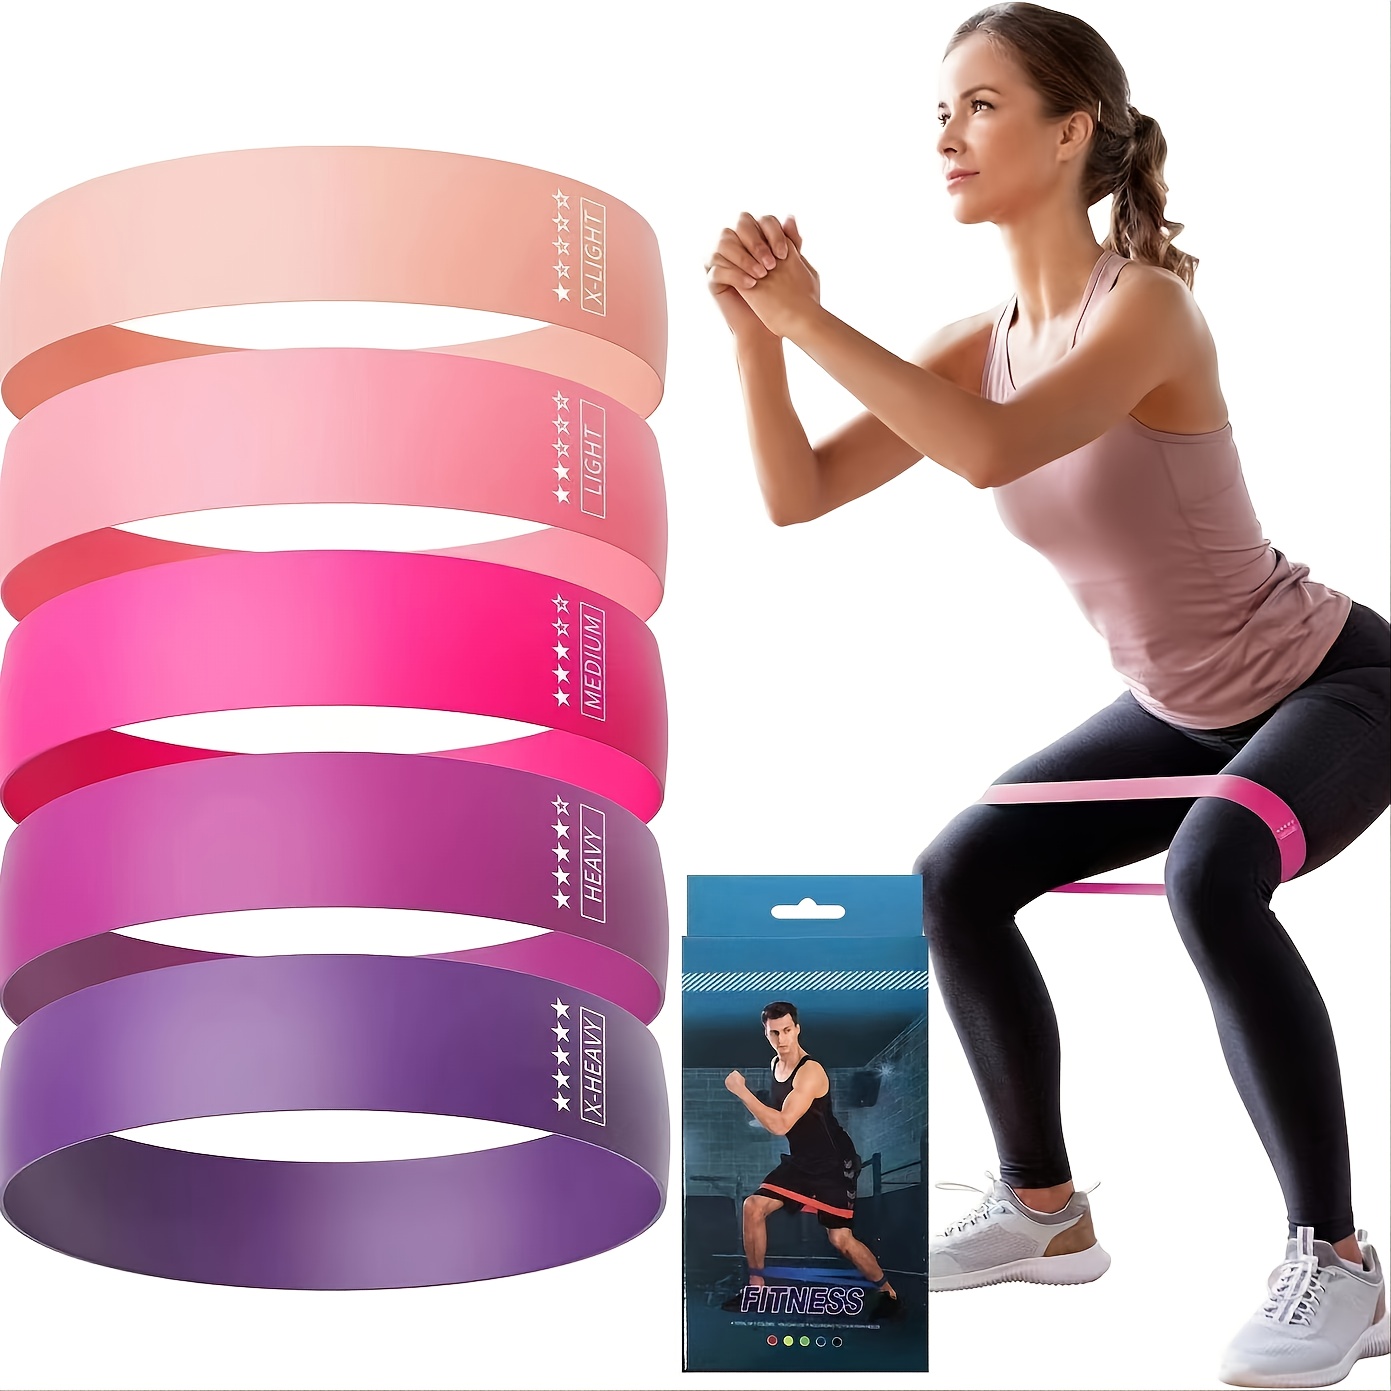 5-Pack Resistance Tapes: Get Fit & Stretched with These Stylish Bands for  Your Workouts!